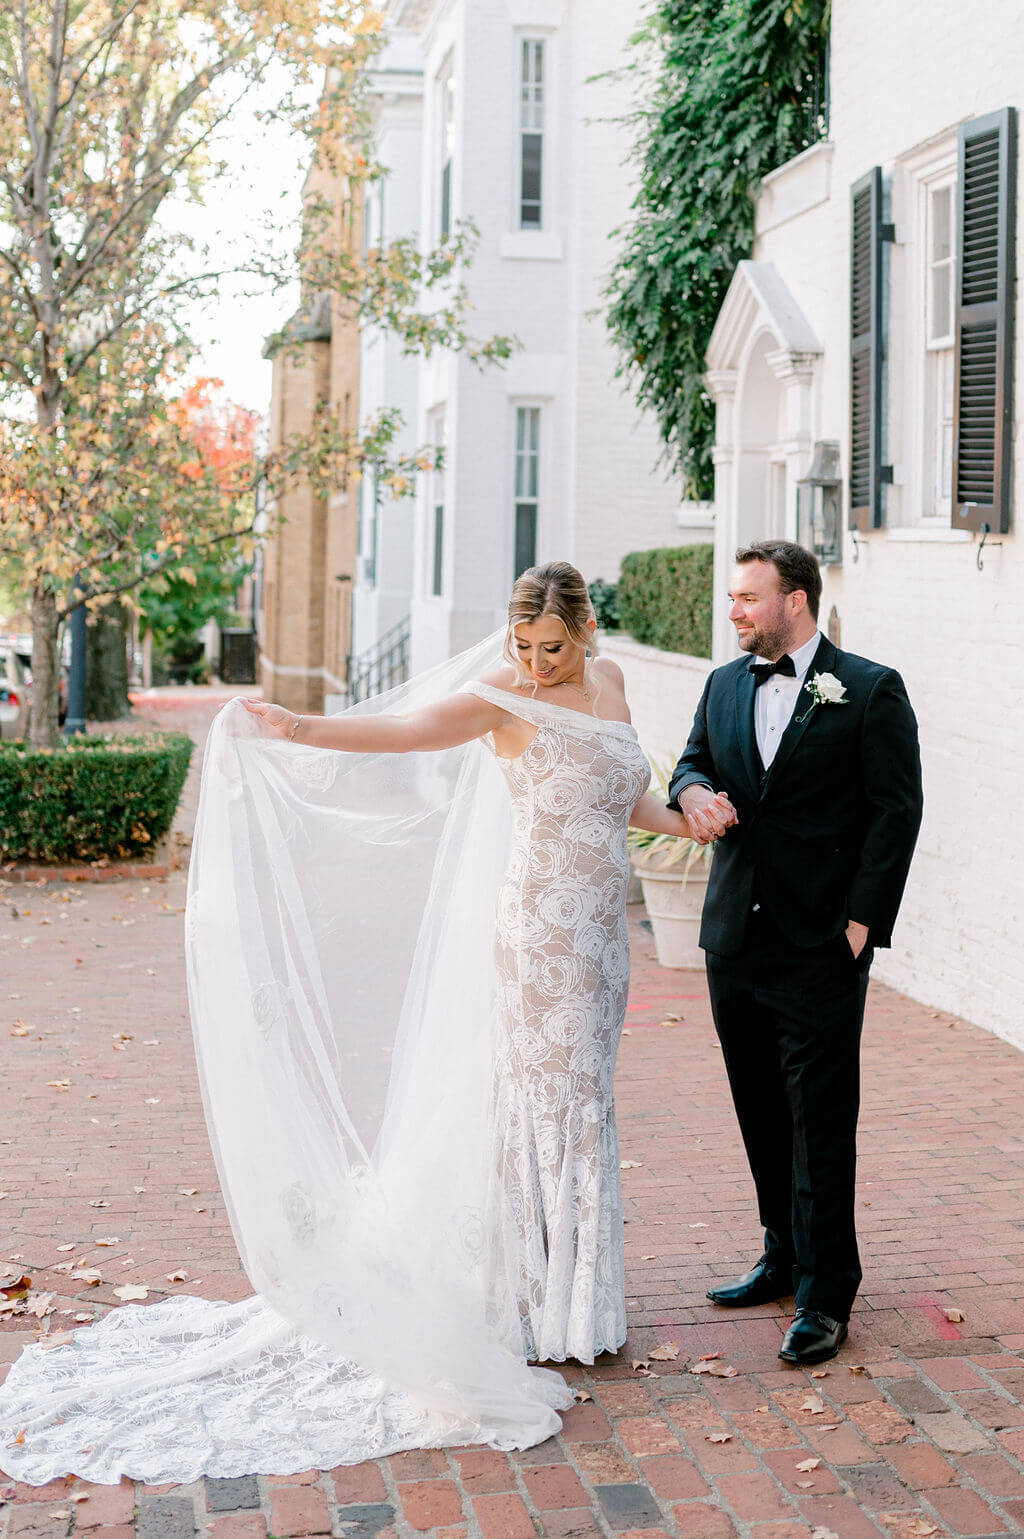 Fun image of a bride and groom dancing together as she looks down at her dress, captured in Georgetown